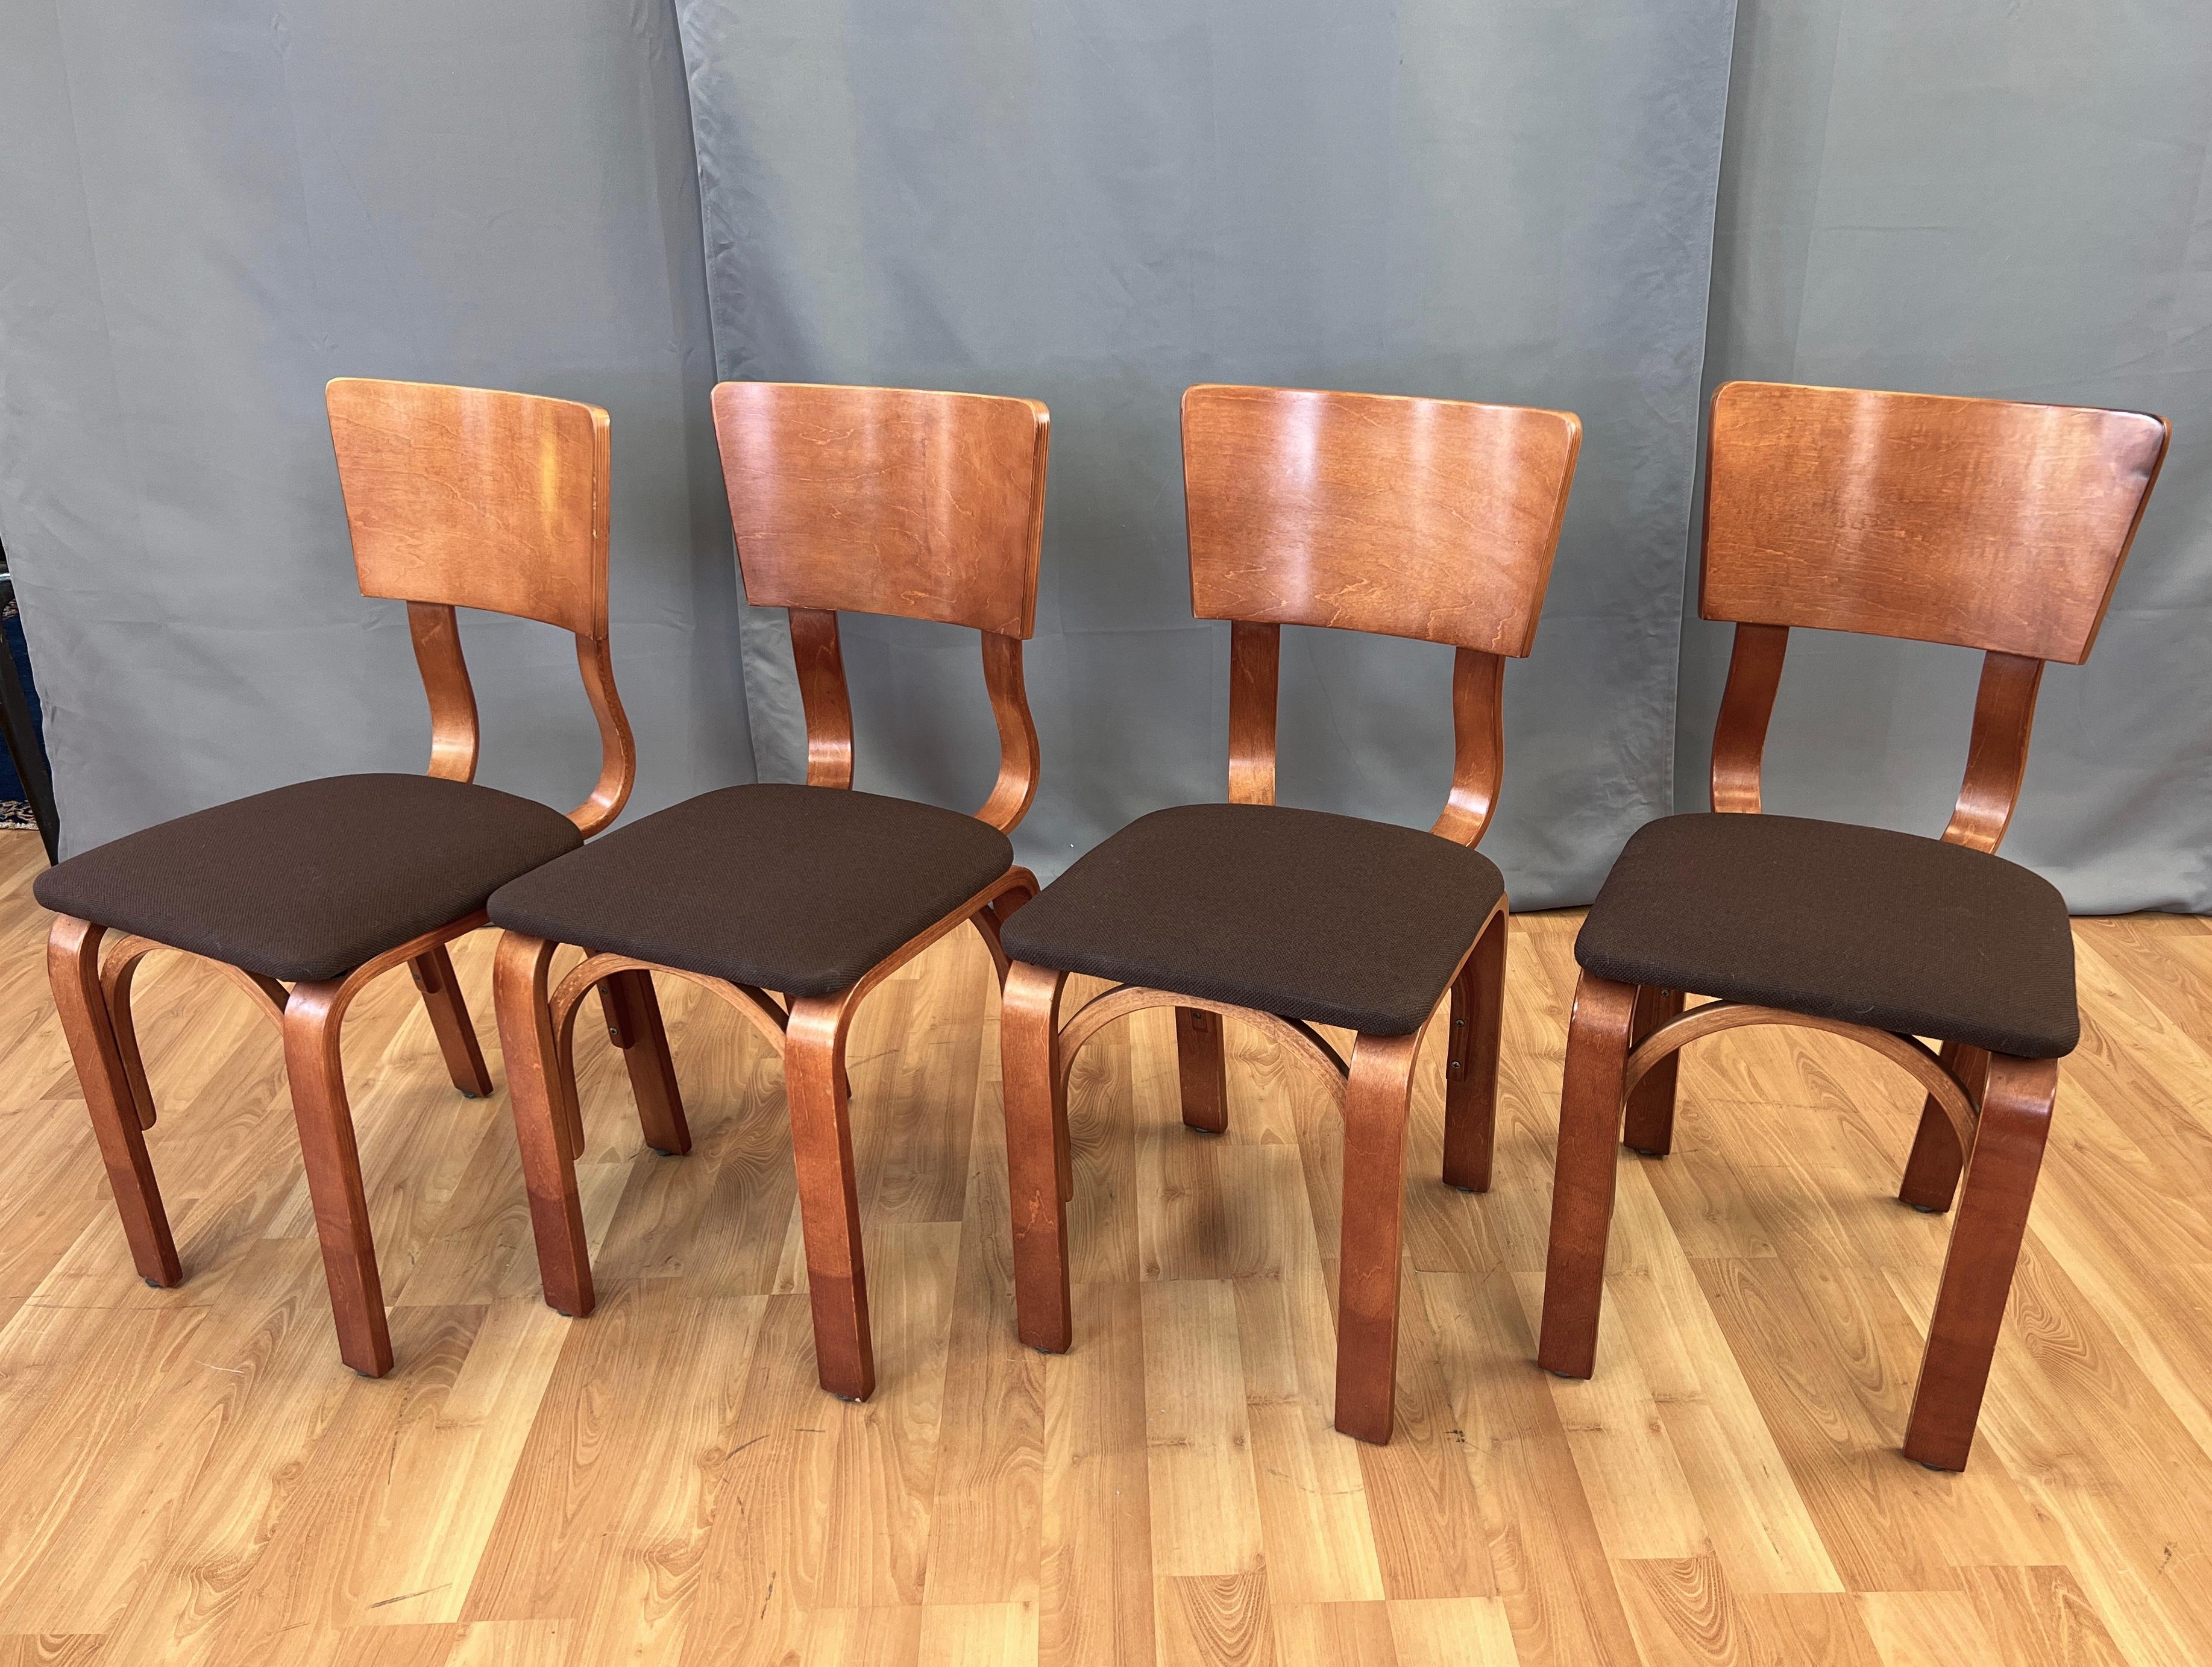 Offered here is a set of four Thonet bentwood dining chairs, circa 1940s.
Legs are two long pieces of wood in layers, that have been bent into U shapes, with the top holding the seating area.
Has two smaller versions of the legs acting as